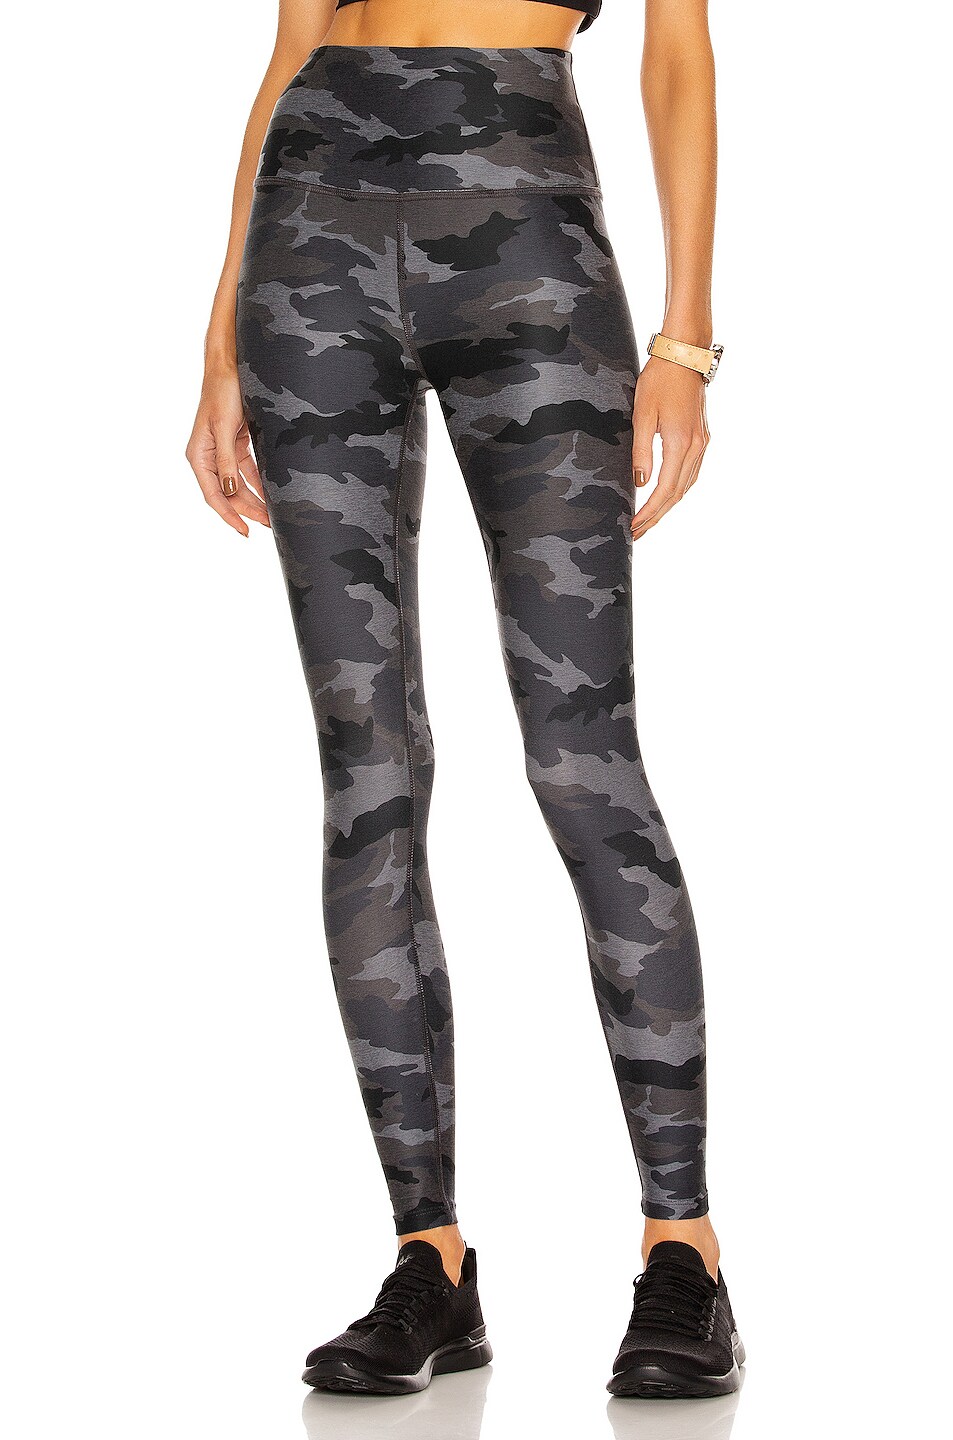 Image 1 of Beyond Yoga Spacedye Caught in the Midi Printed High Waisted Legging in Silver Mist Camo